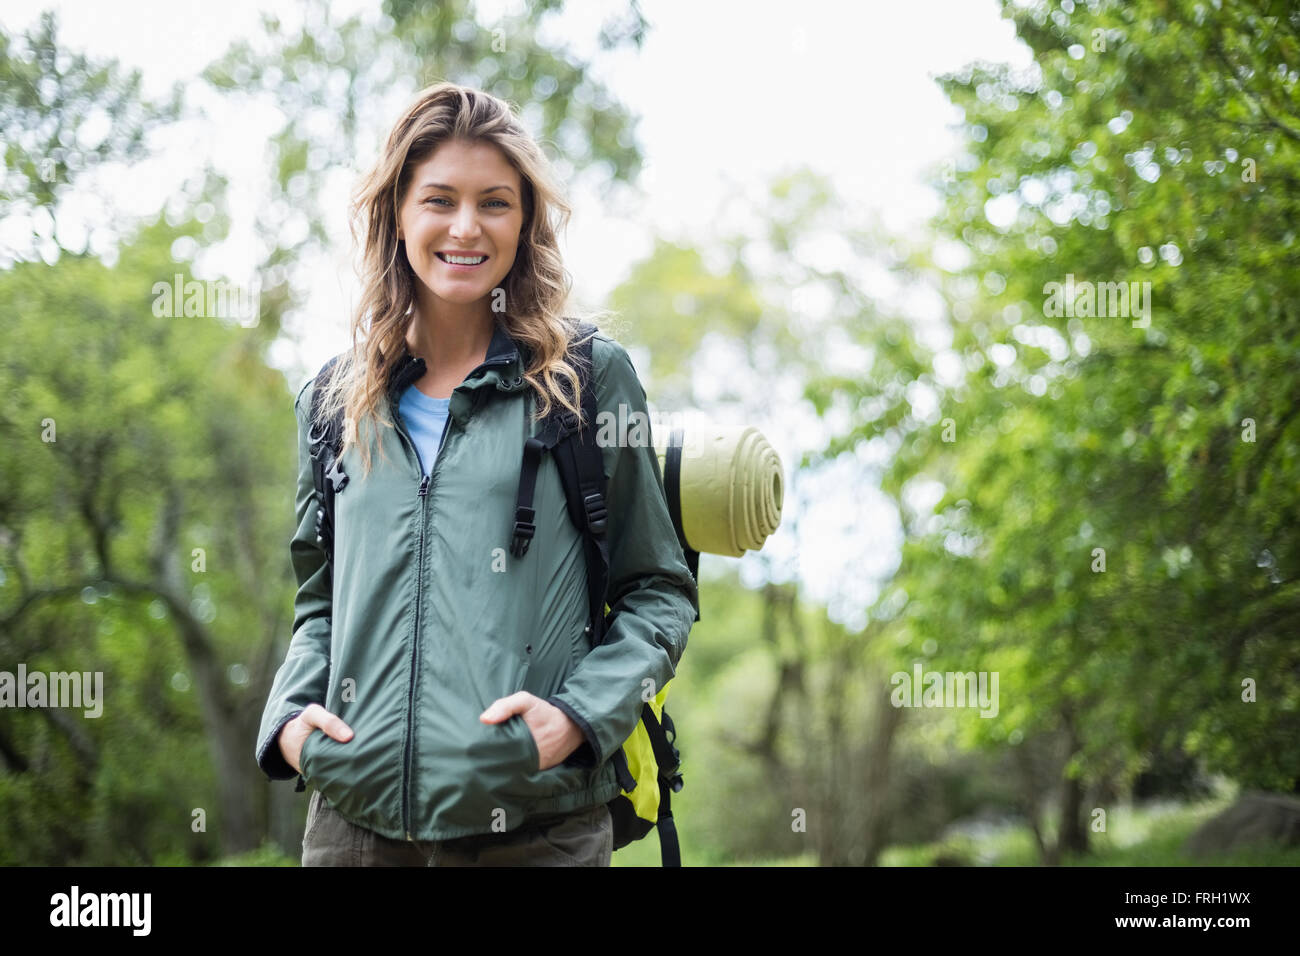 Portrait of woman with hands in pockets Stock Photo